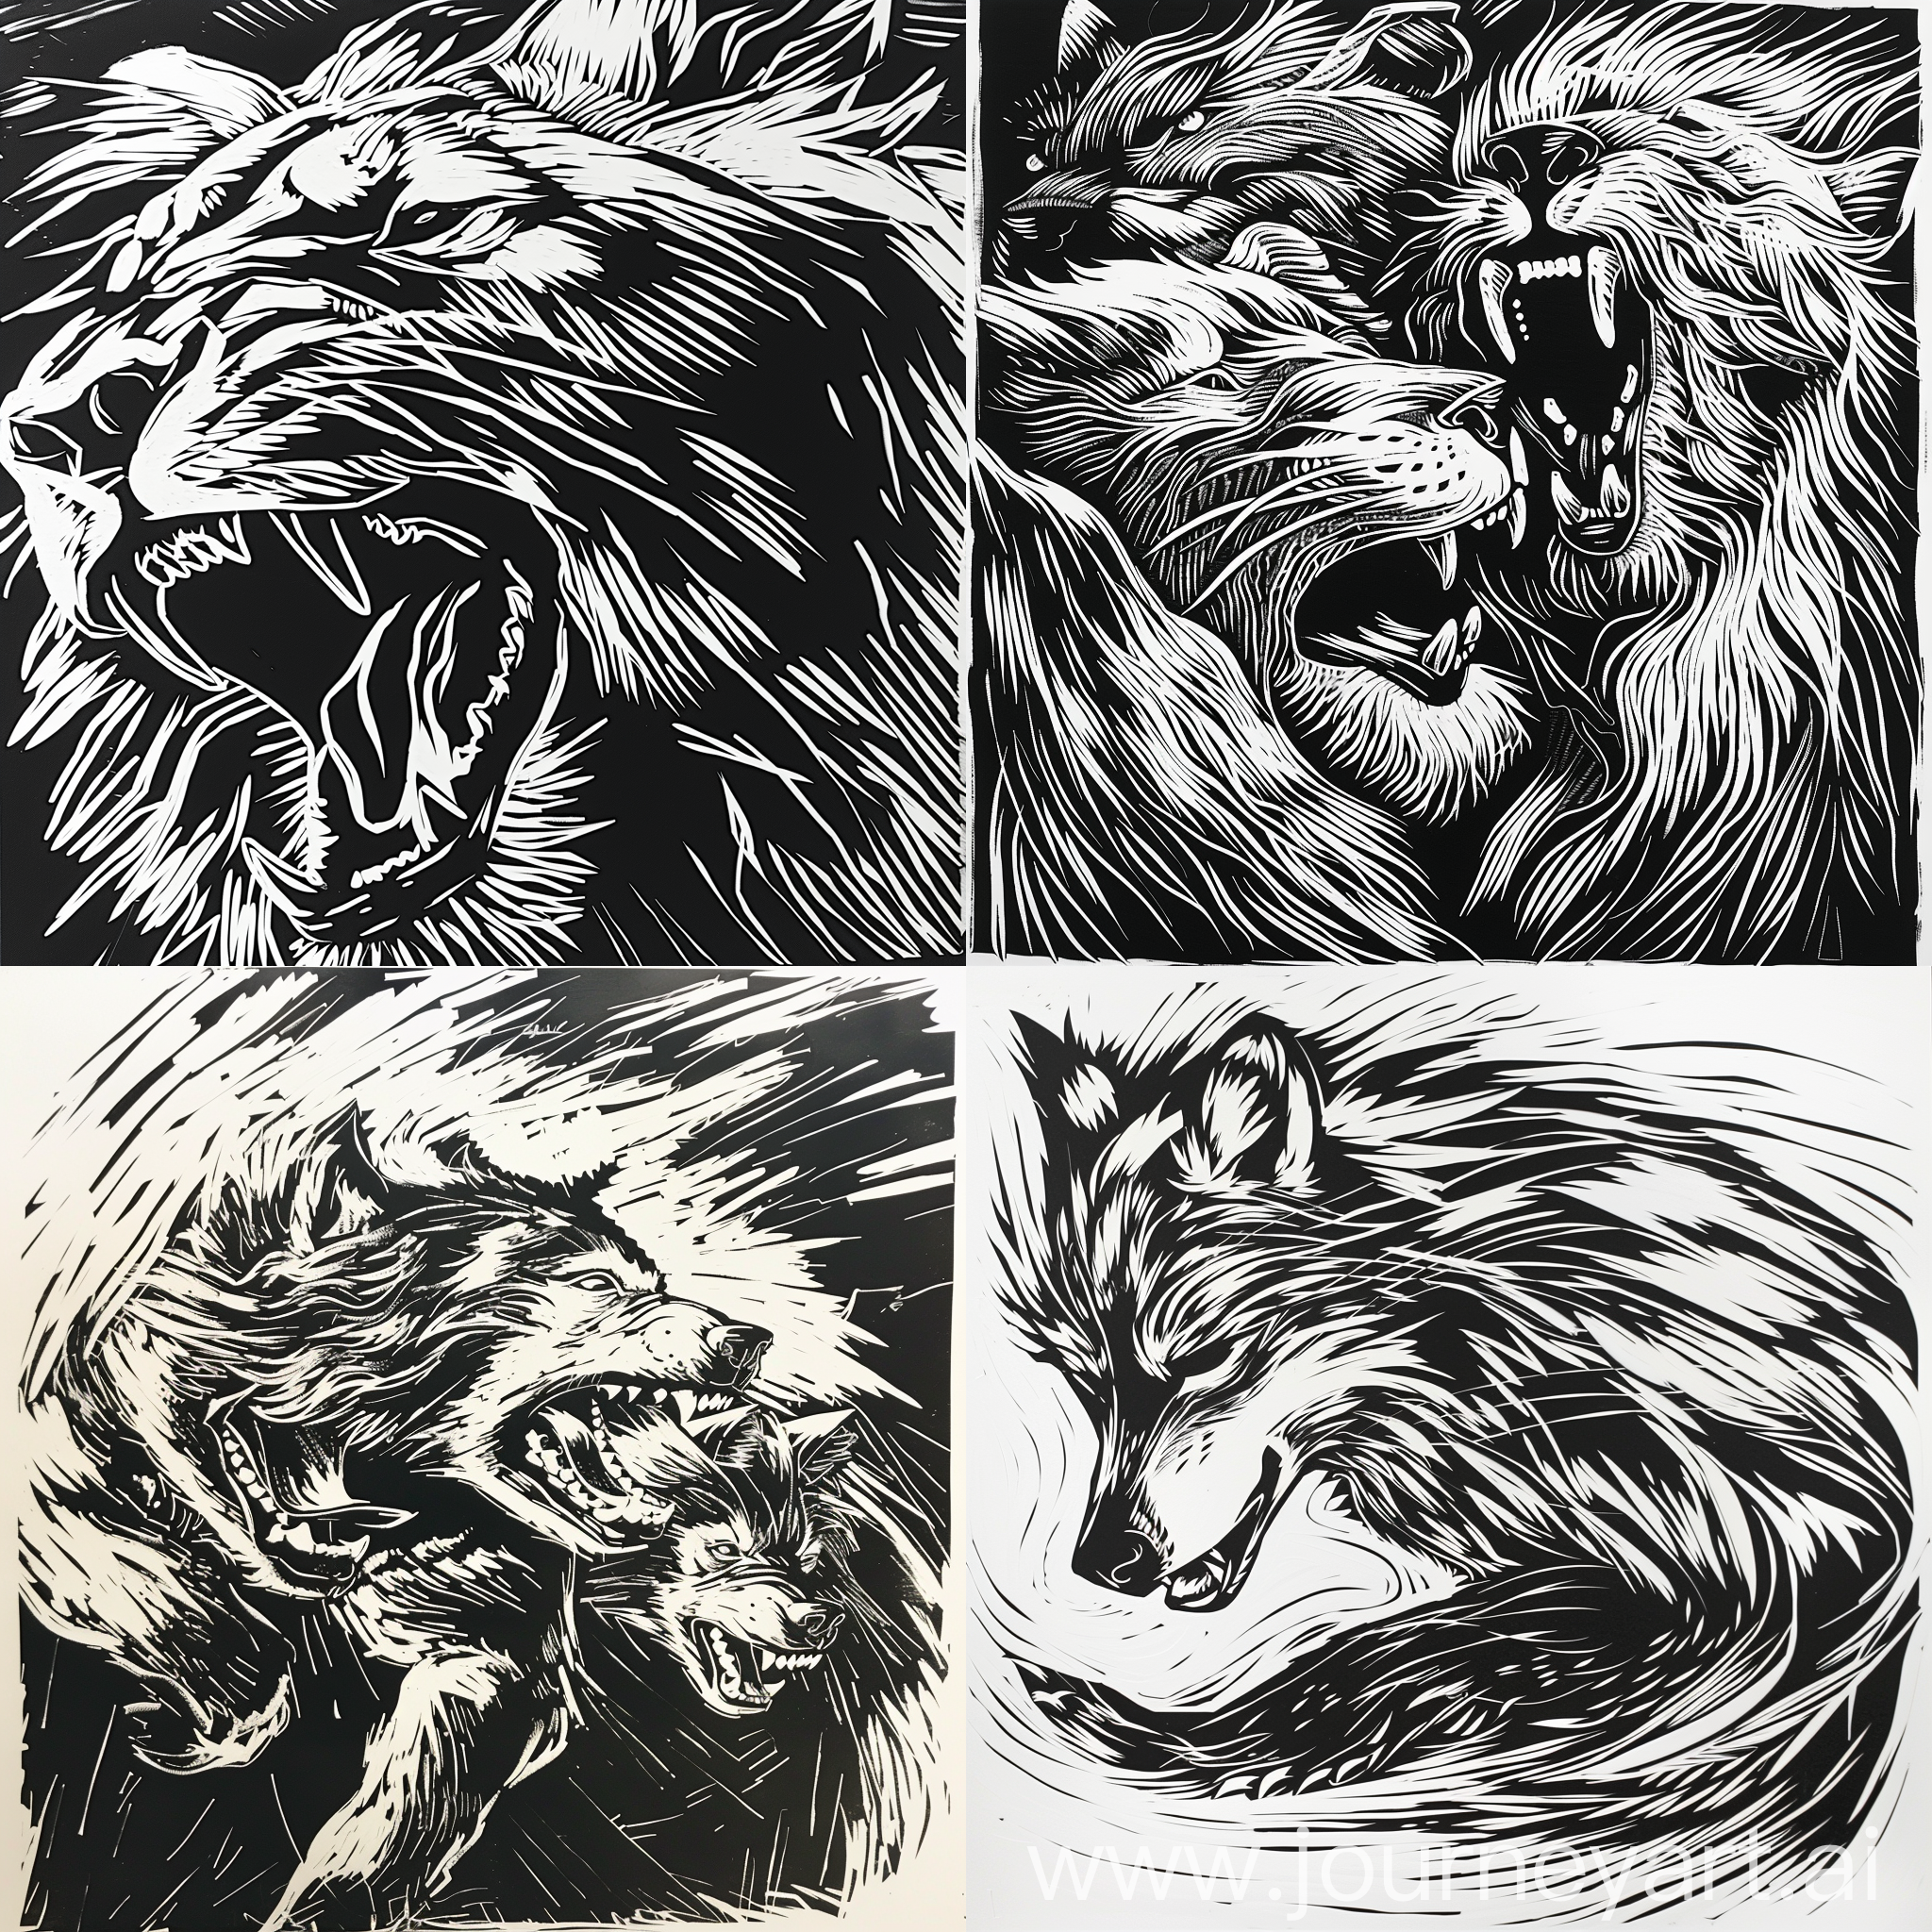 Create a woodcut print of animals usin9 expressive and fluid line work. Use texturesshapes, and lines to capture the essence of each animal's power and arace.Let the lines fow to convey the unique energy and spirit of each animal, striking a balance between strength and flexibility to bring their forms and poses to life. With each stroke, bring the animals to life,unleashing their vitality and beauty ontothe paper.